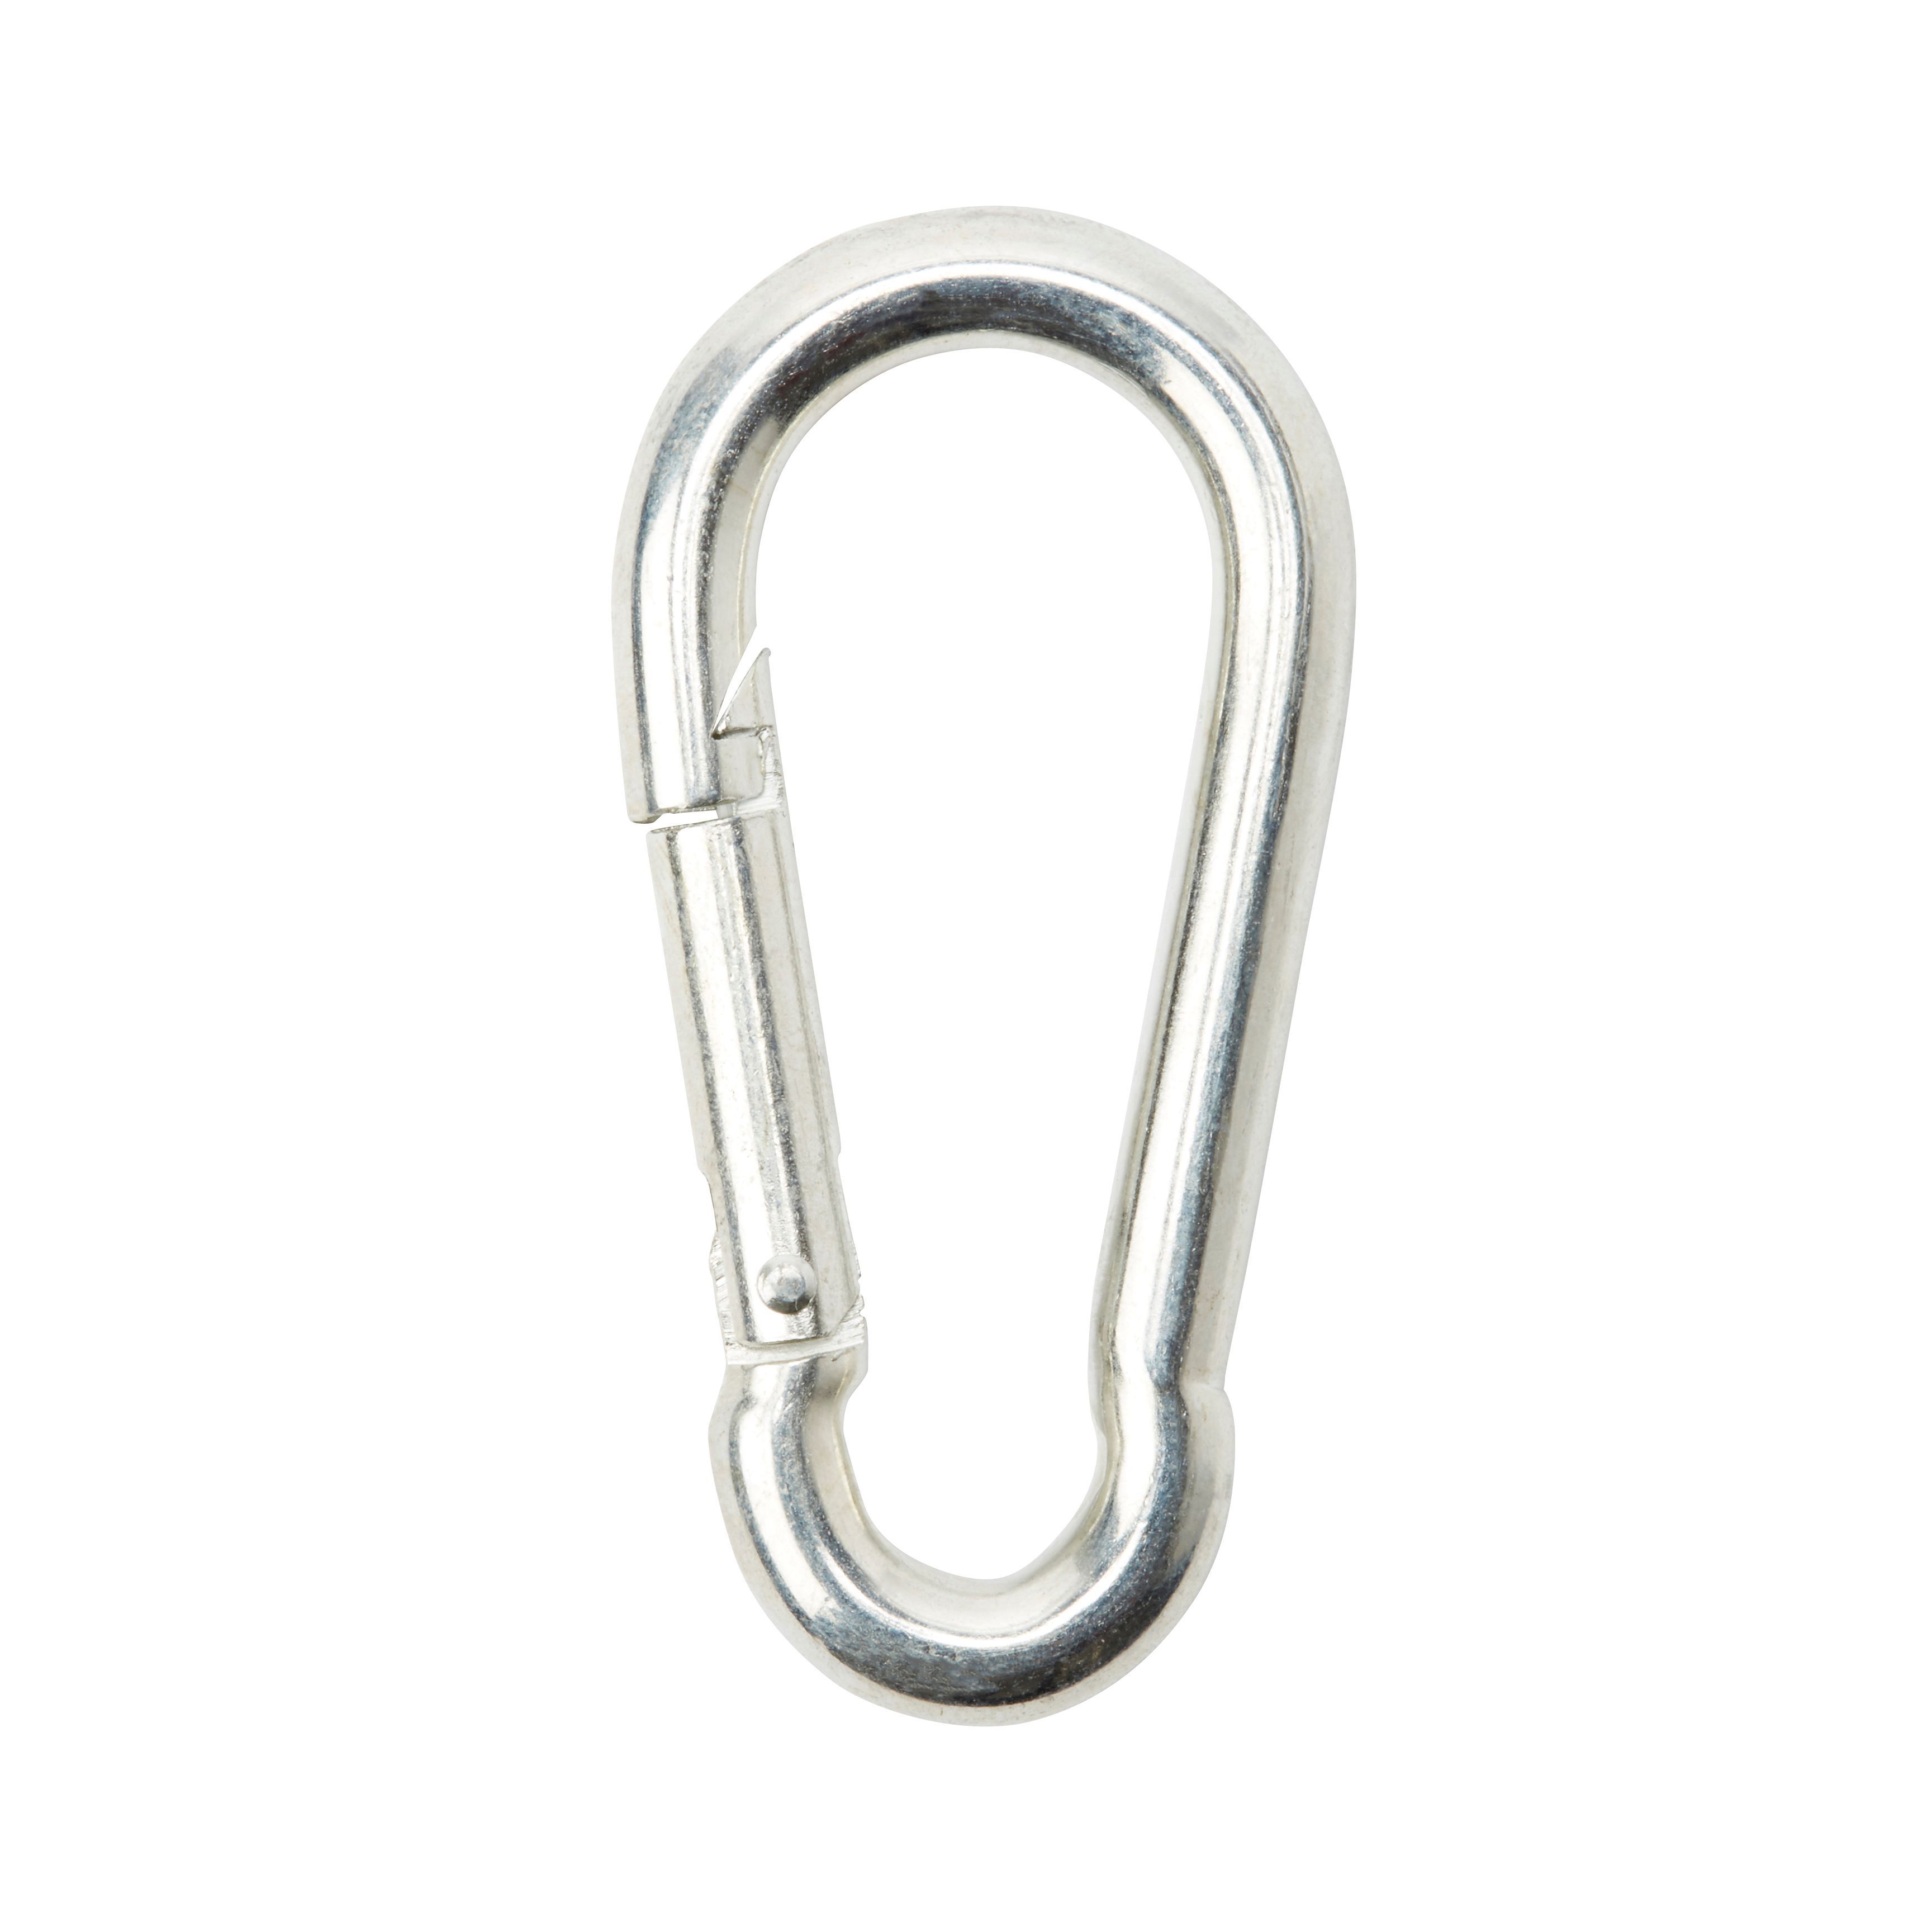 Diall Galvanised Zinc-plated Steel Spring snap hook (L)80mm